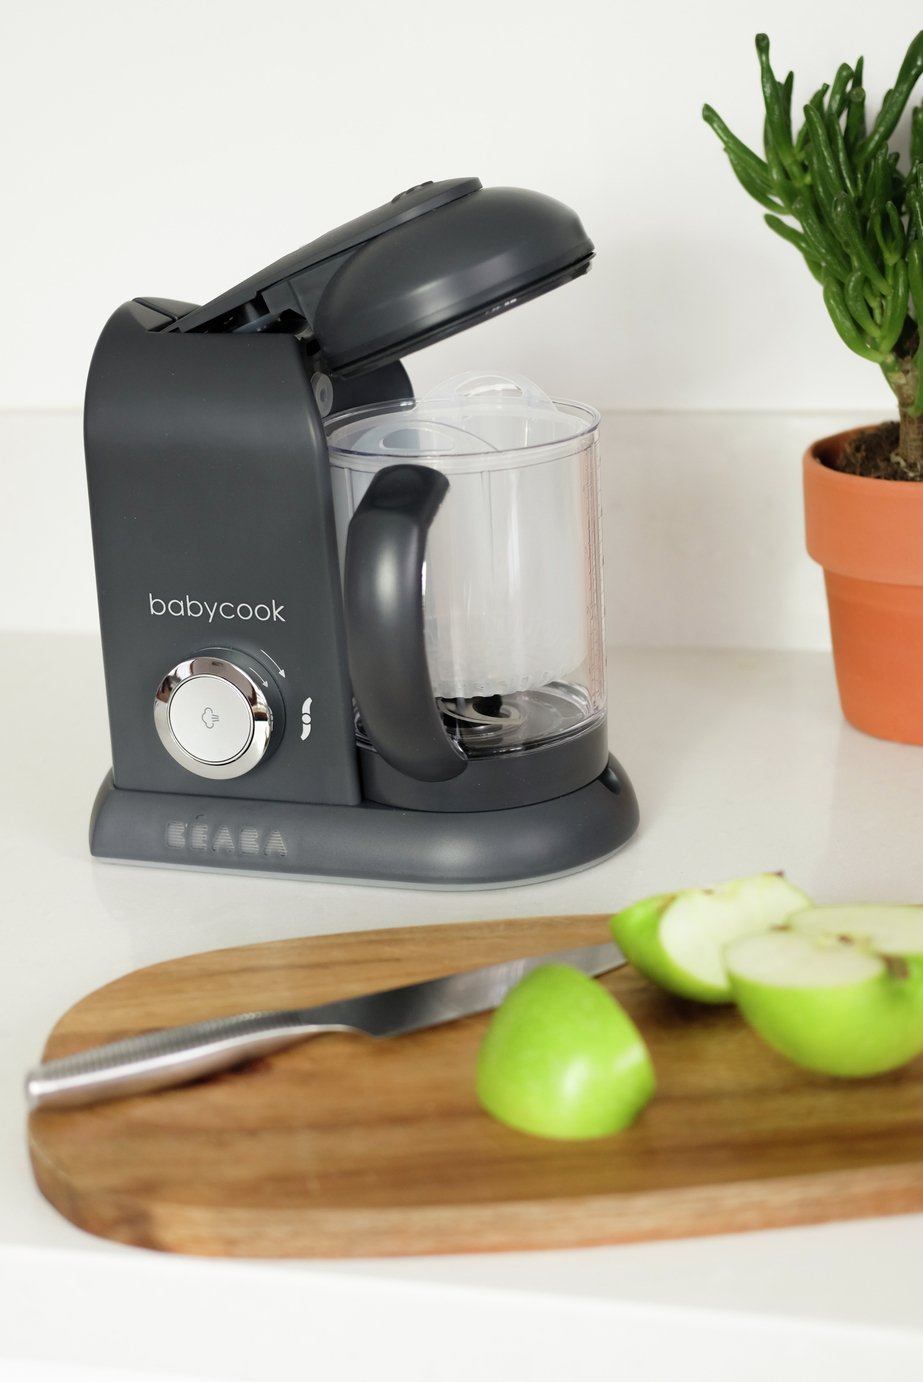 Babycook Solo Food Maker Review